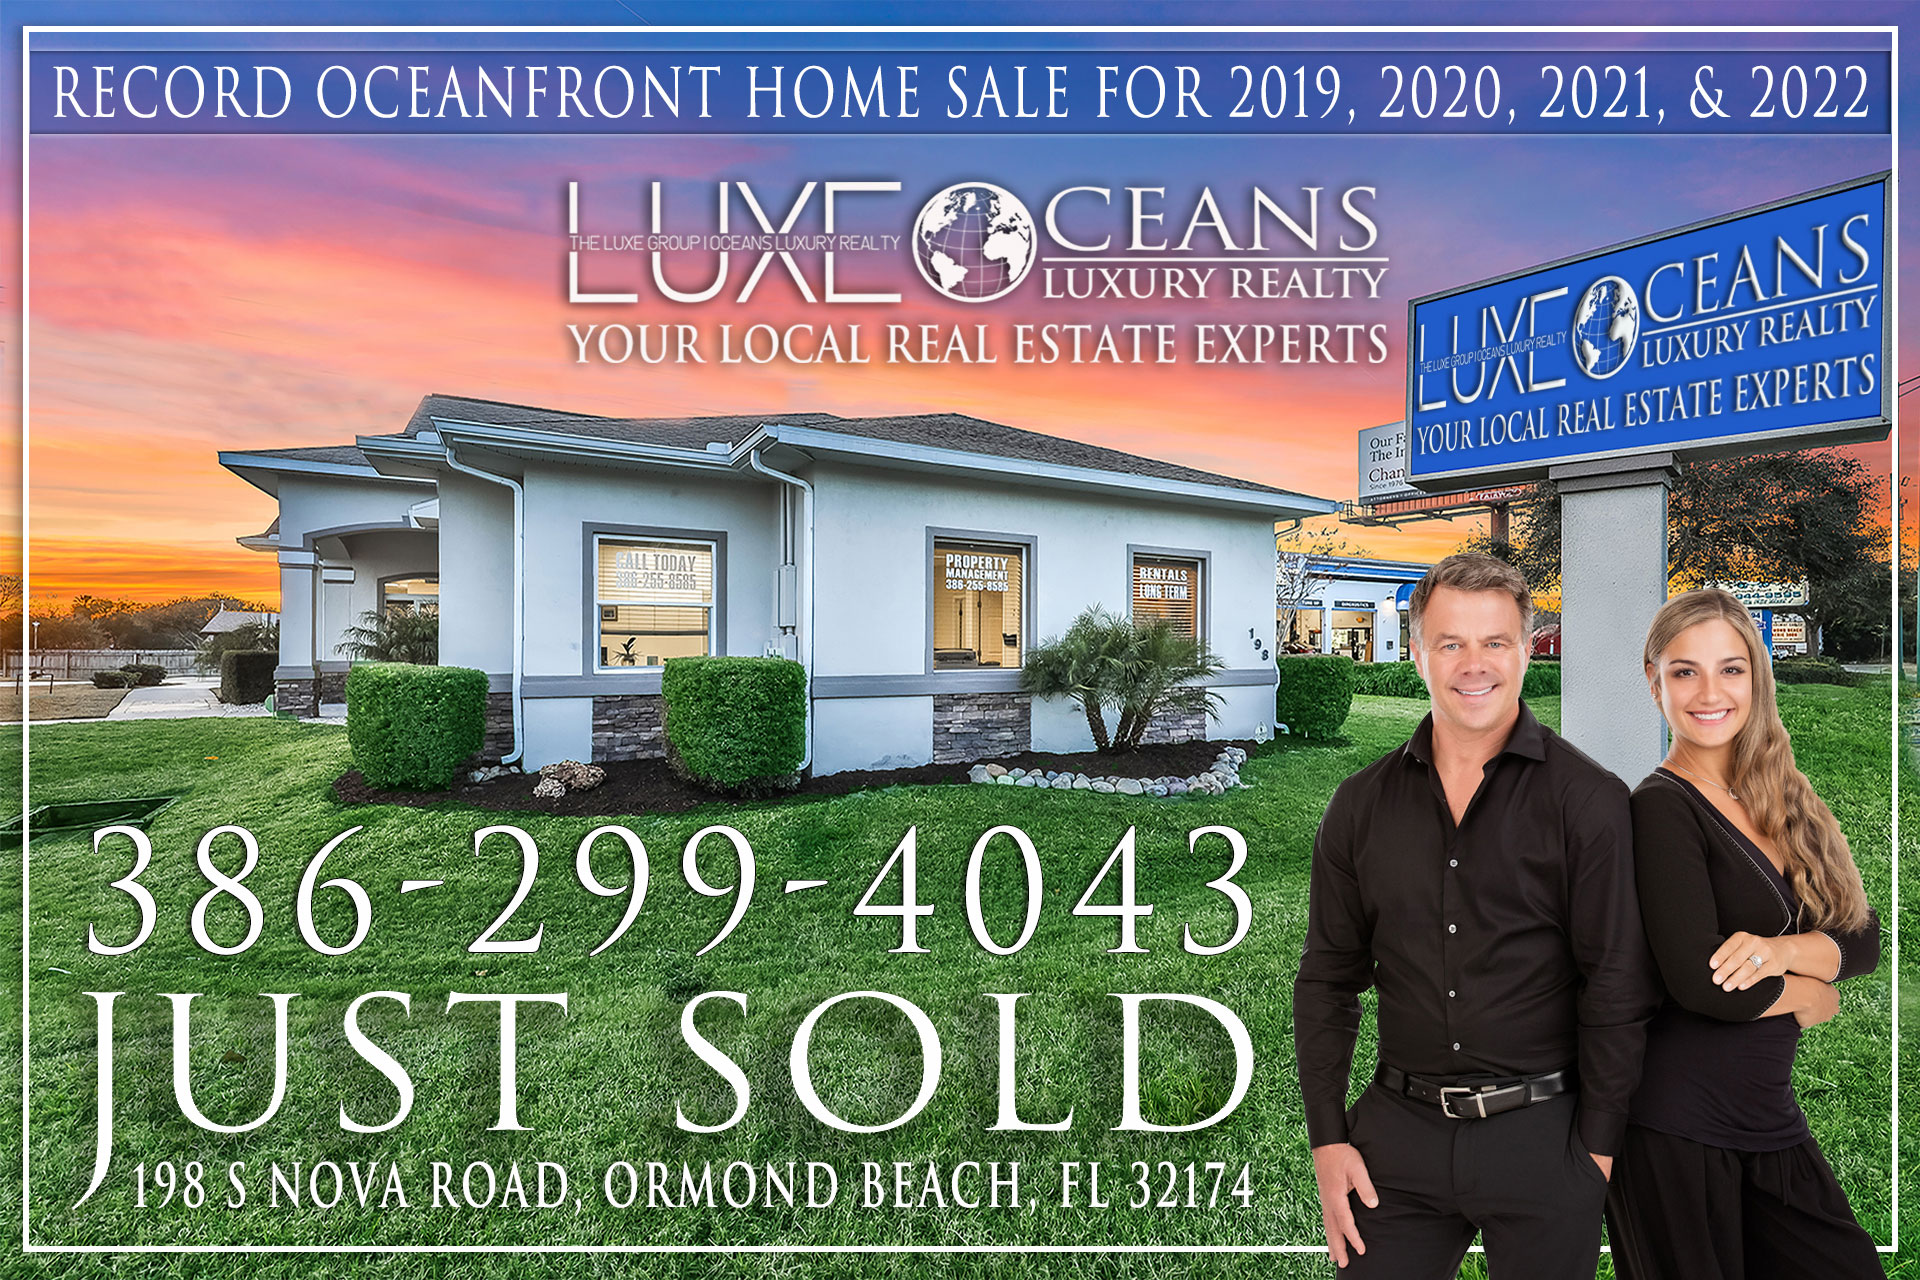 198 Nova Road Just Sold Ormond Beach FL 32174 Commercial Real Estate Just Sold. The LUXE Group at Oceans Luxury Realty 386-299-4043